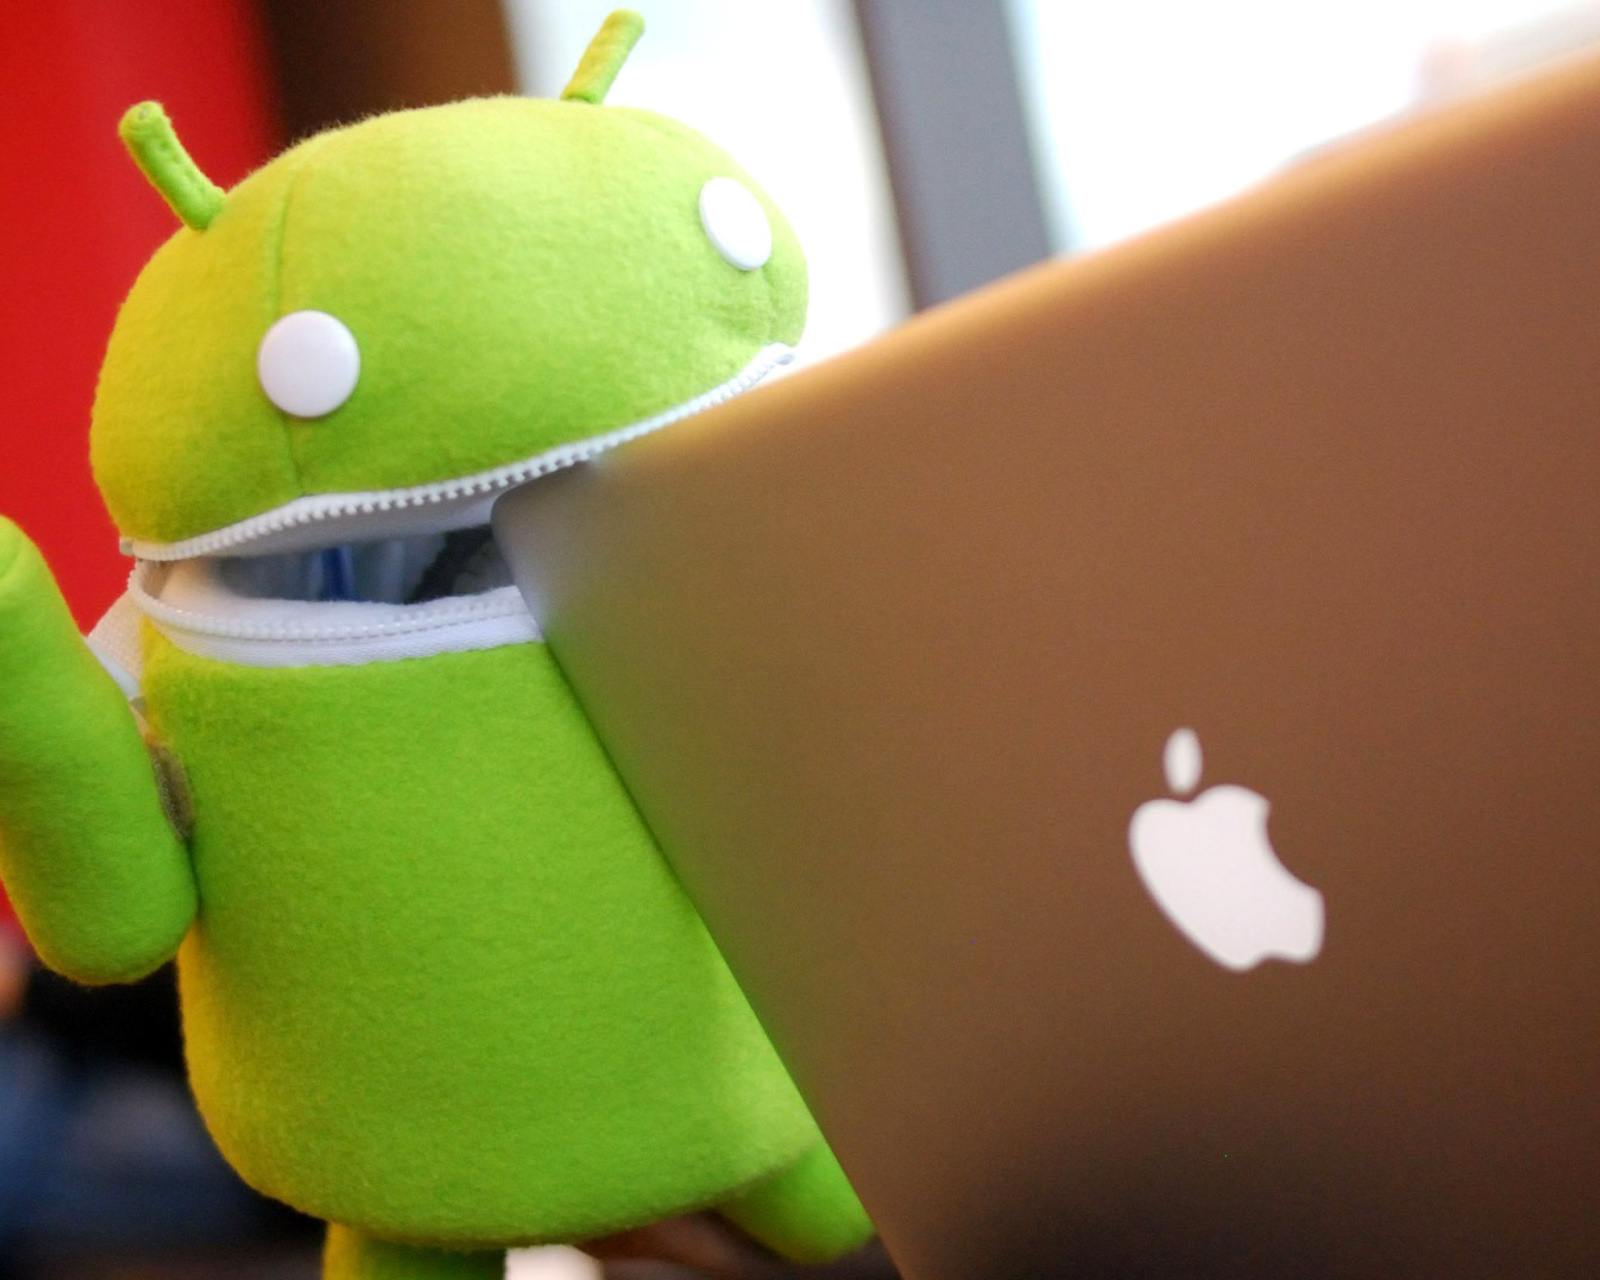 Android Robot and Apple MacBook Air Laptop wallpaper 1600x1280